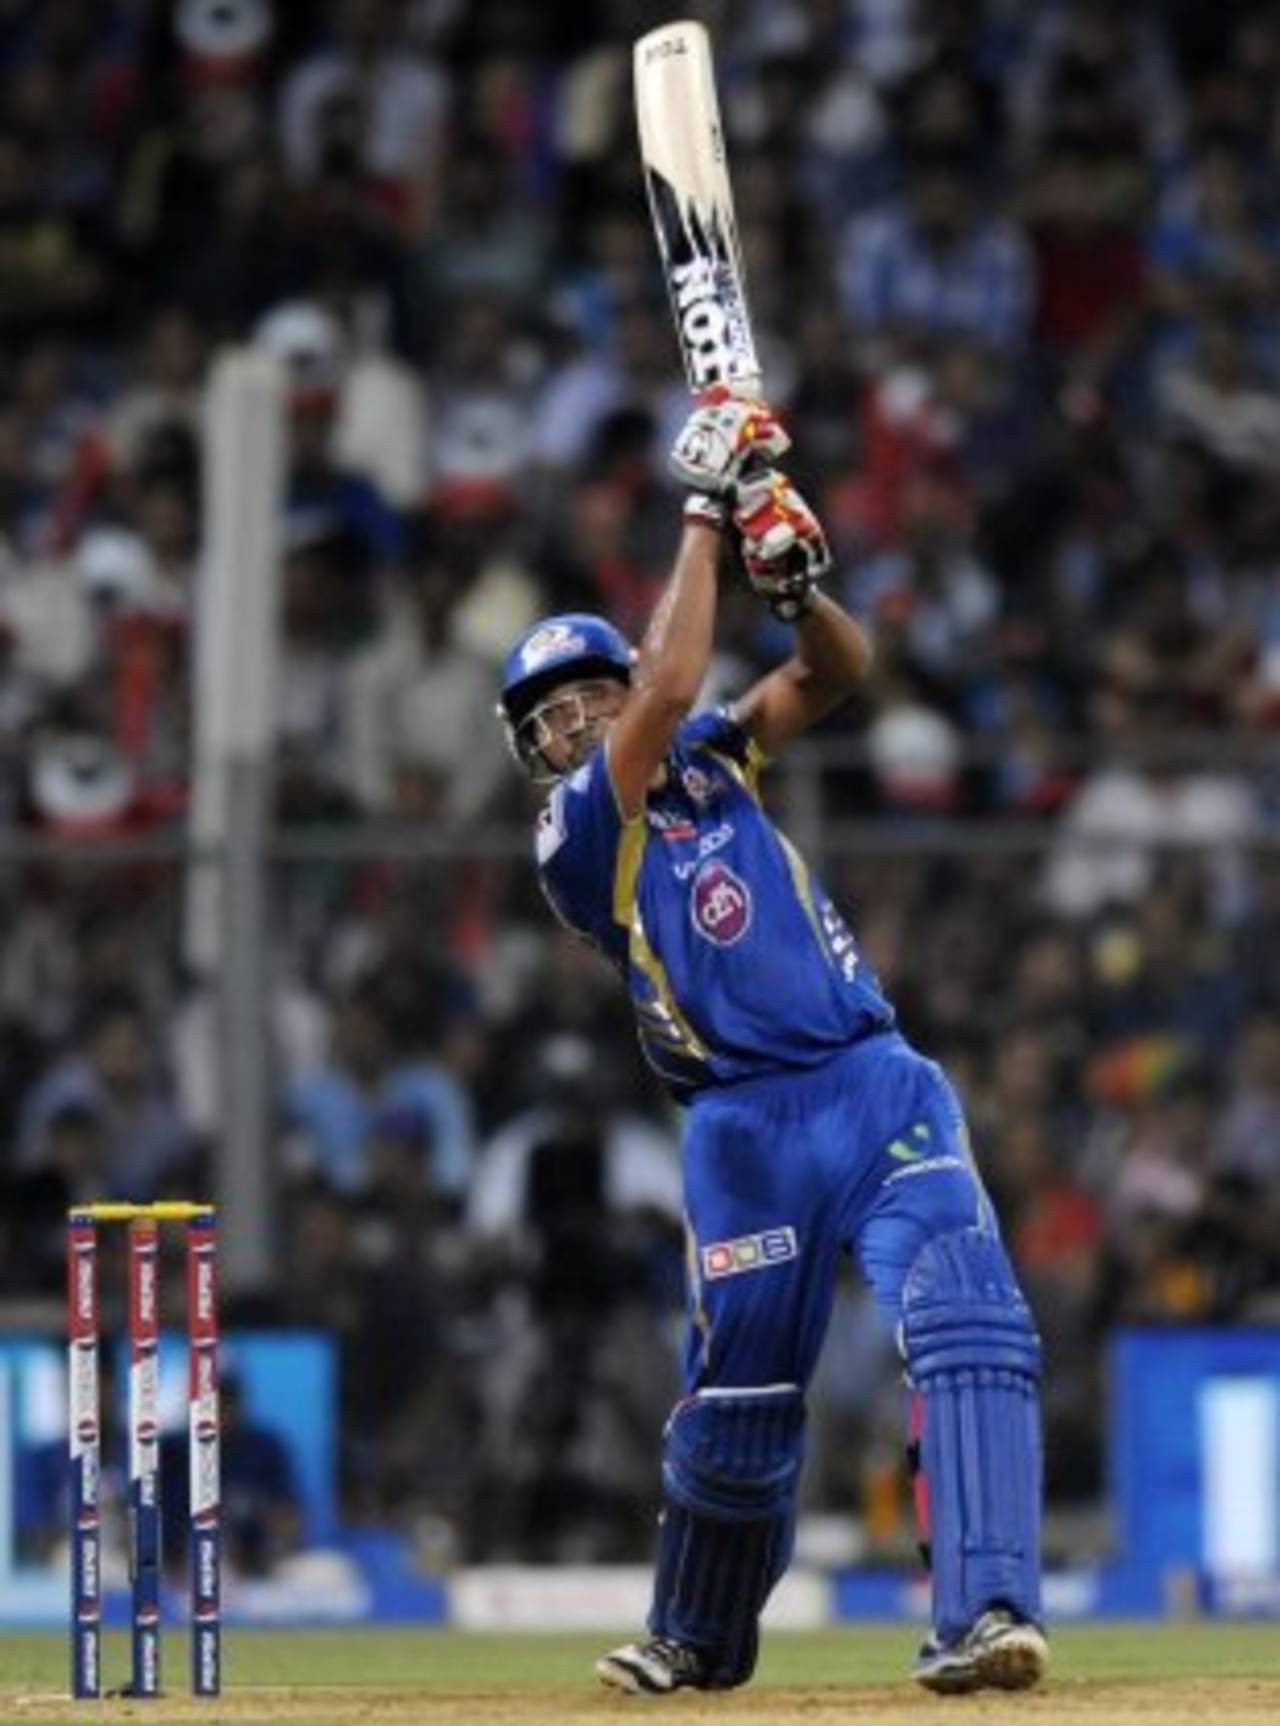 He held his own while captaining Mumbai Indians to their first IPL title, but can Rohit Sharma translate that confidence into success as a batsman?&nbsp;&nbsp;&bull;&nbsp;&nbsp;BCCI